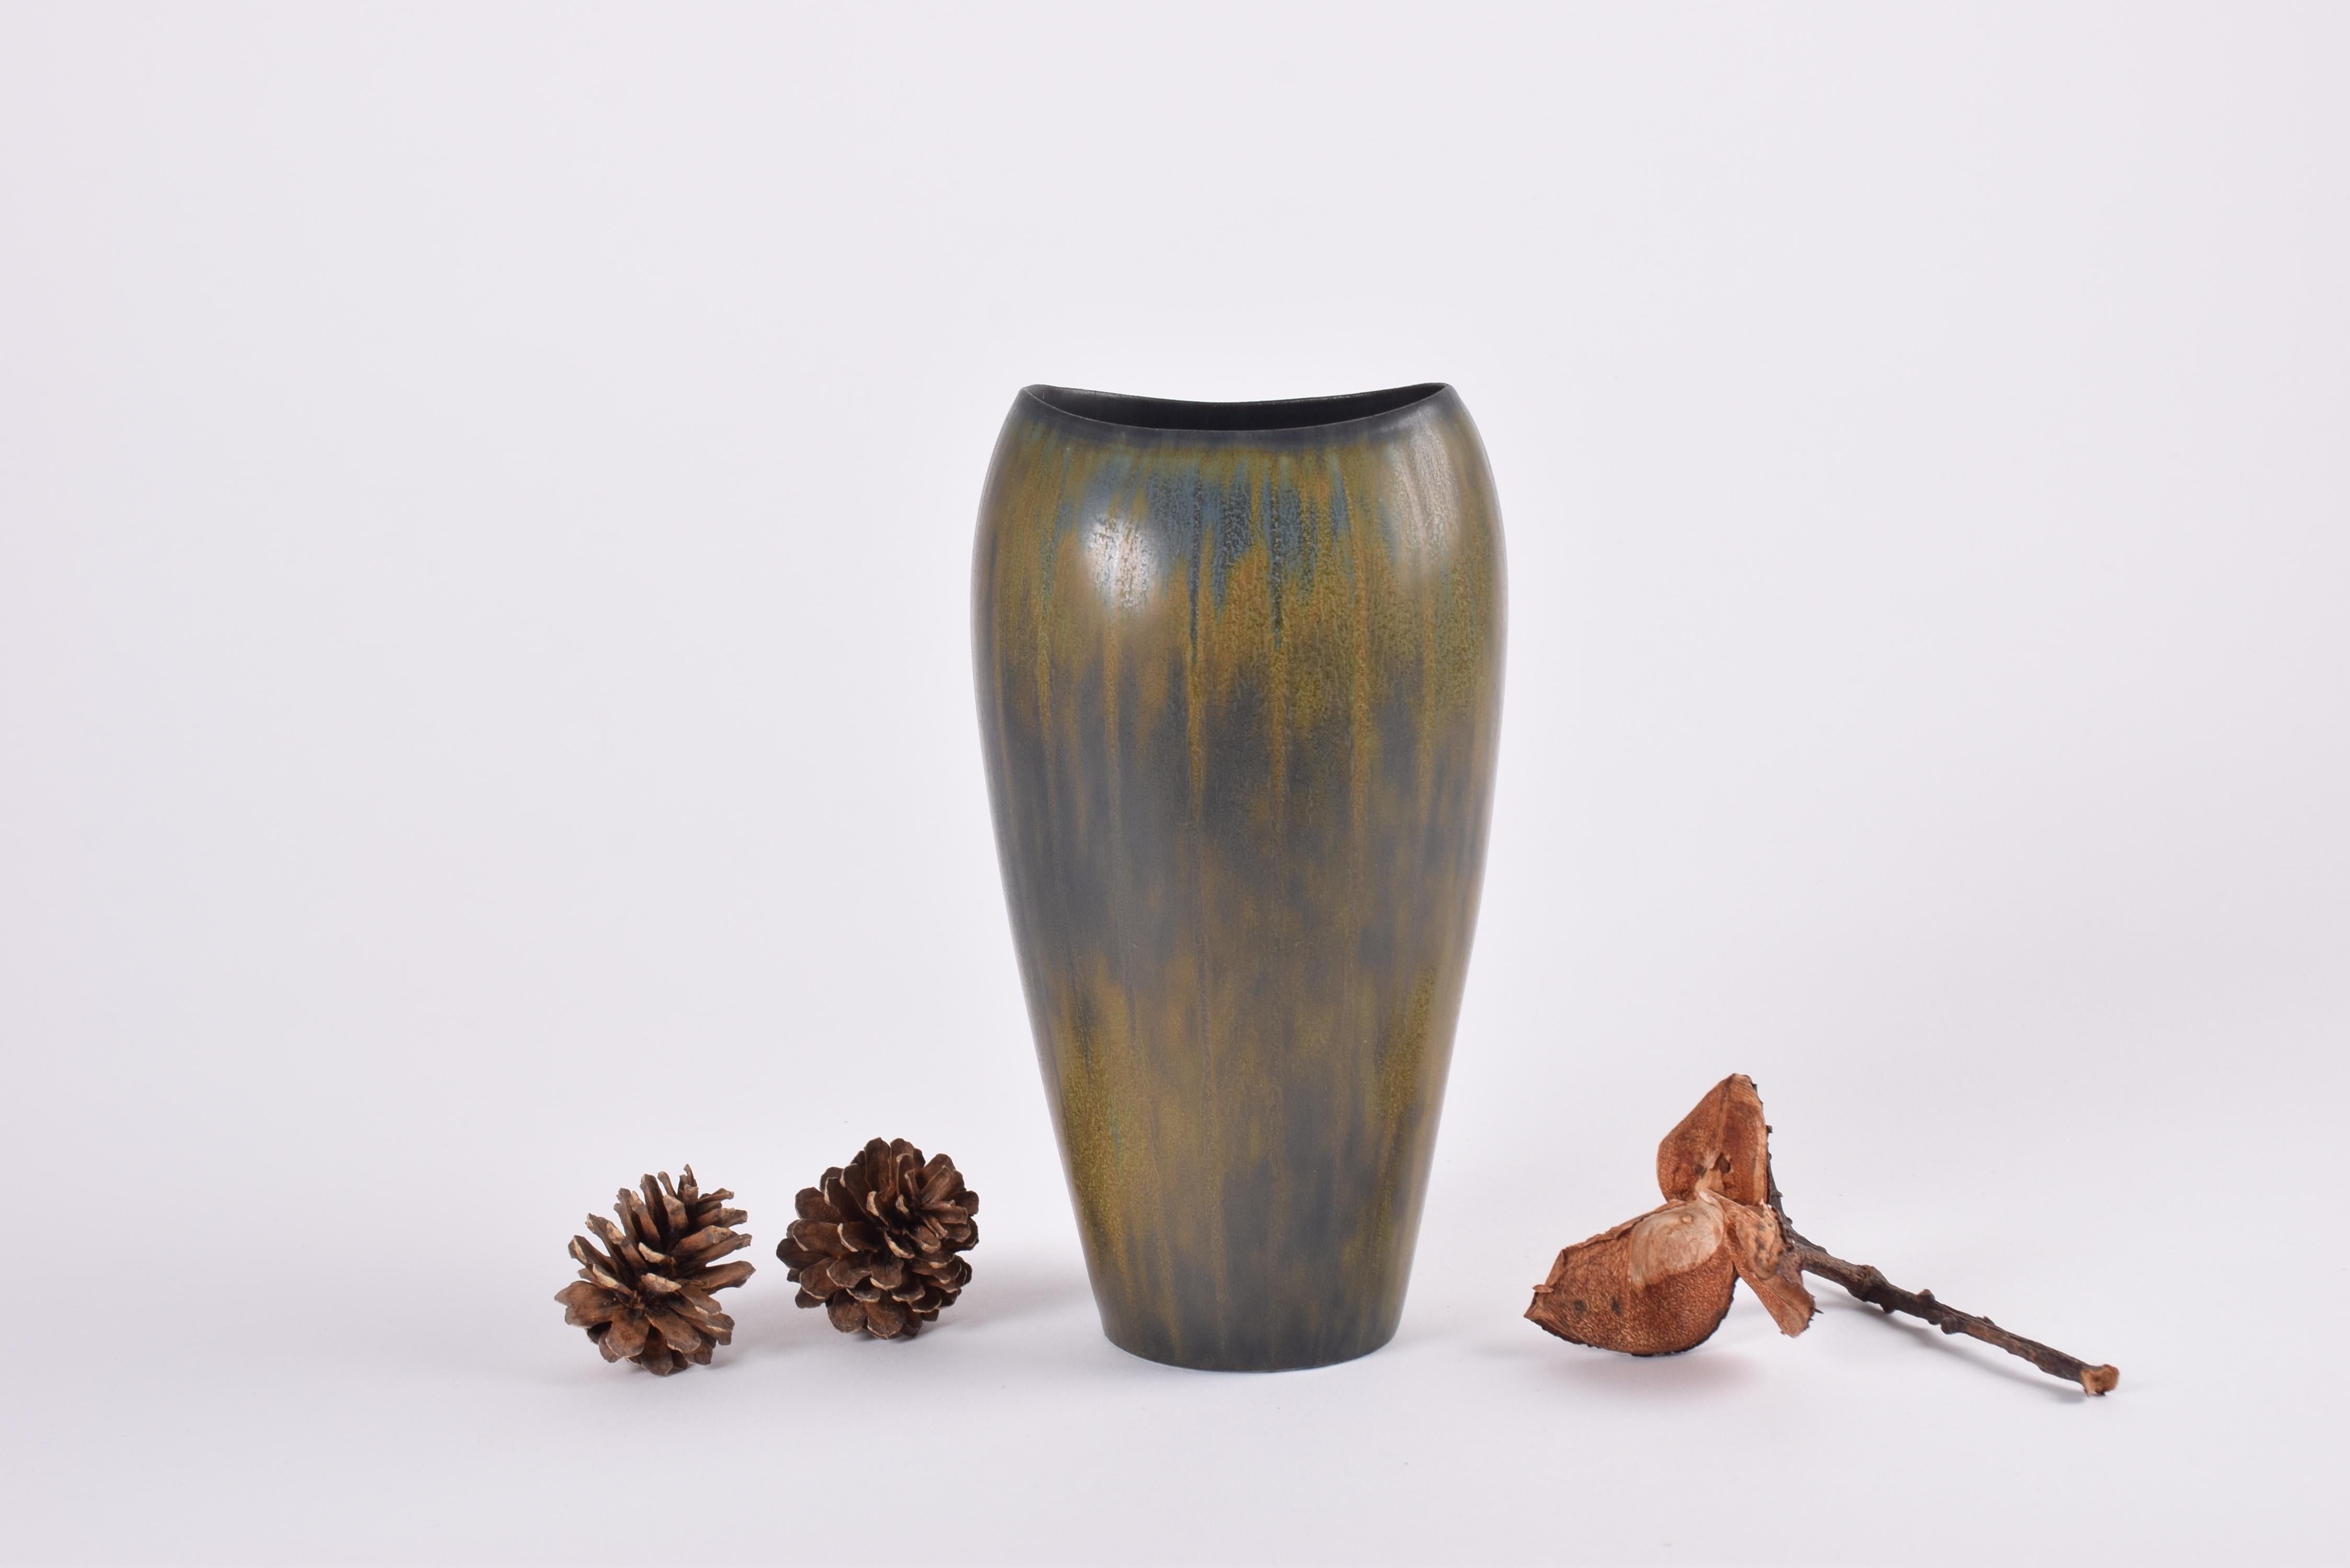 Absolutely stunning glaze on this vase by Gunnar Nylund for Rörstrand Sweden.
It's the model AXZ and it was designed and manufactured circa 1950s to 1960s.

The vase has an elegant shape with very thin lips towards the top. The glaze colors are